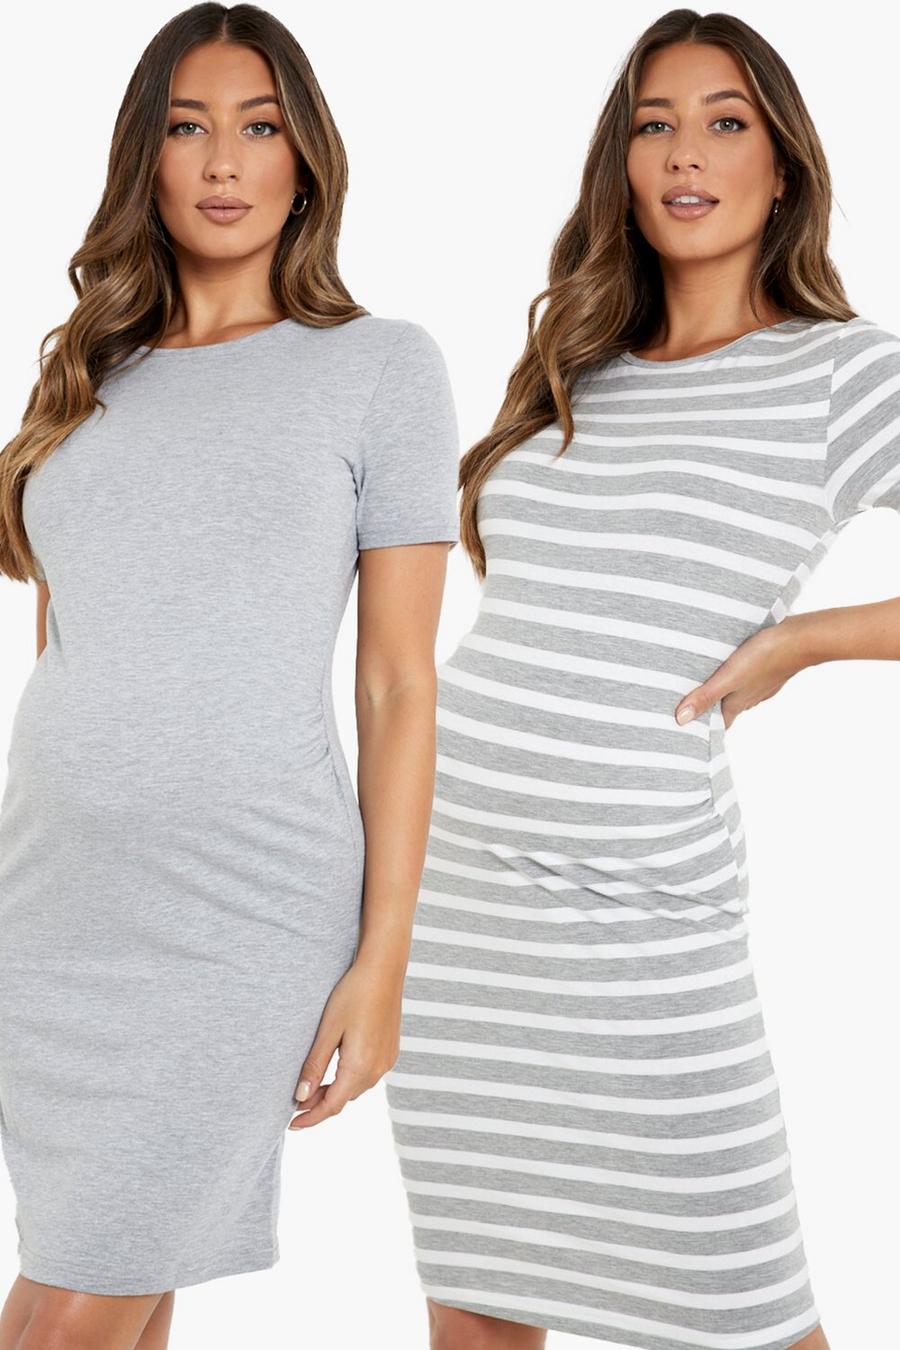 Grey marl Maternity Bodycon Mini Dress 2 Pack image number 1